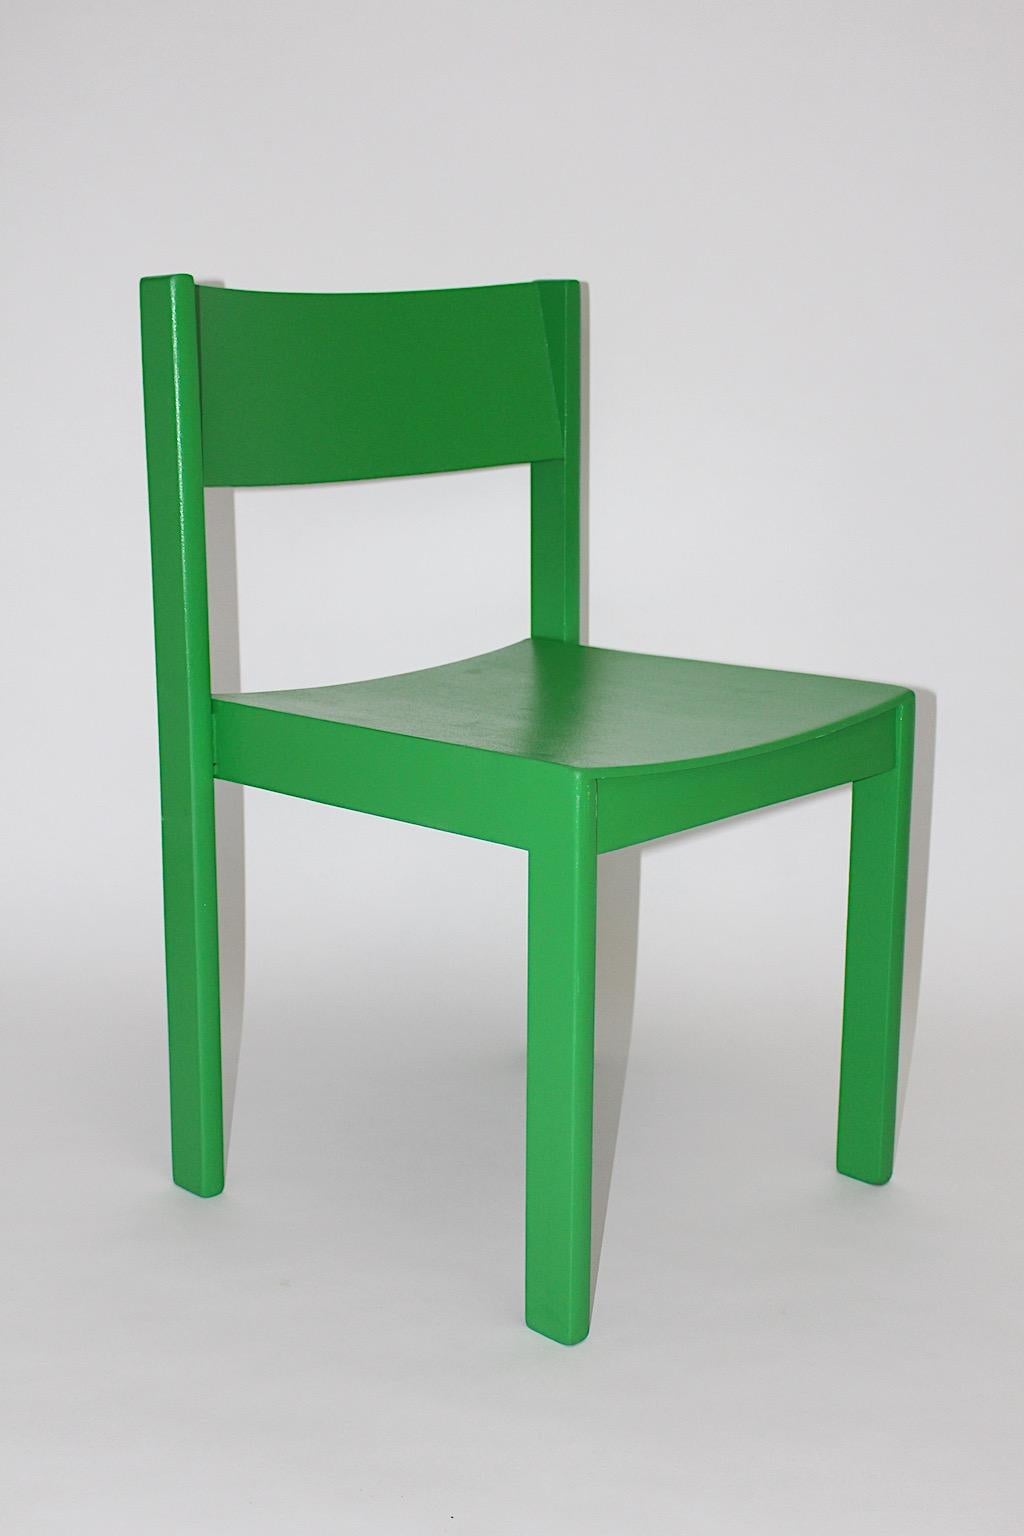 20th Century Modernist Green Vintage Beech Stackable Dining Chairs 1950s Austria For Sale